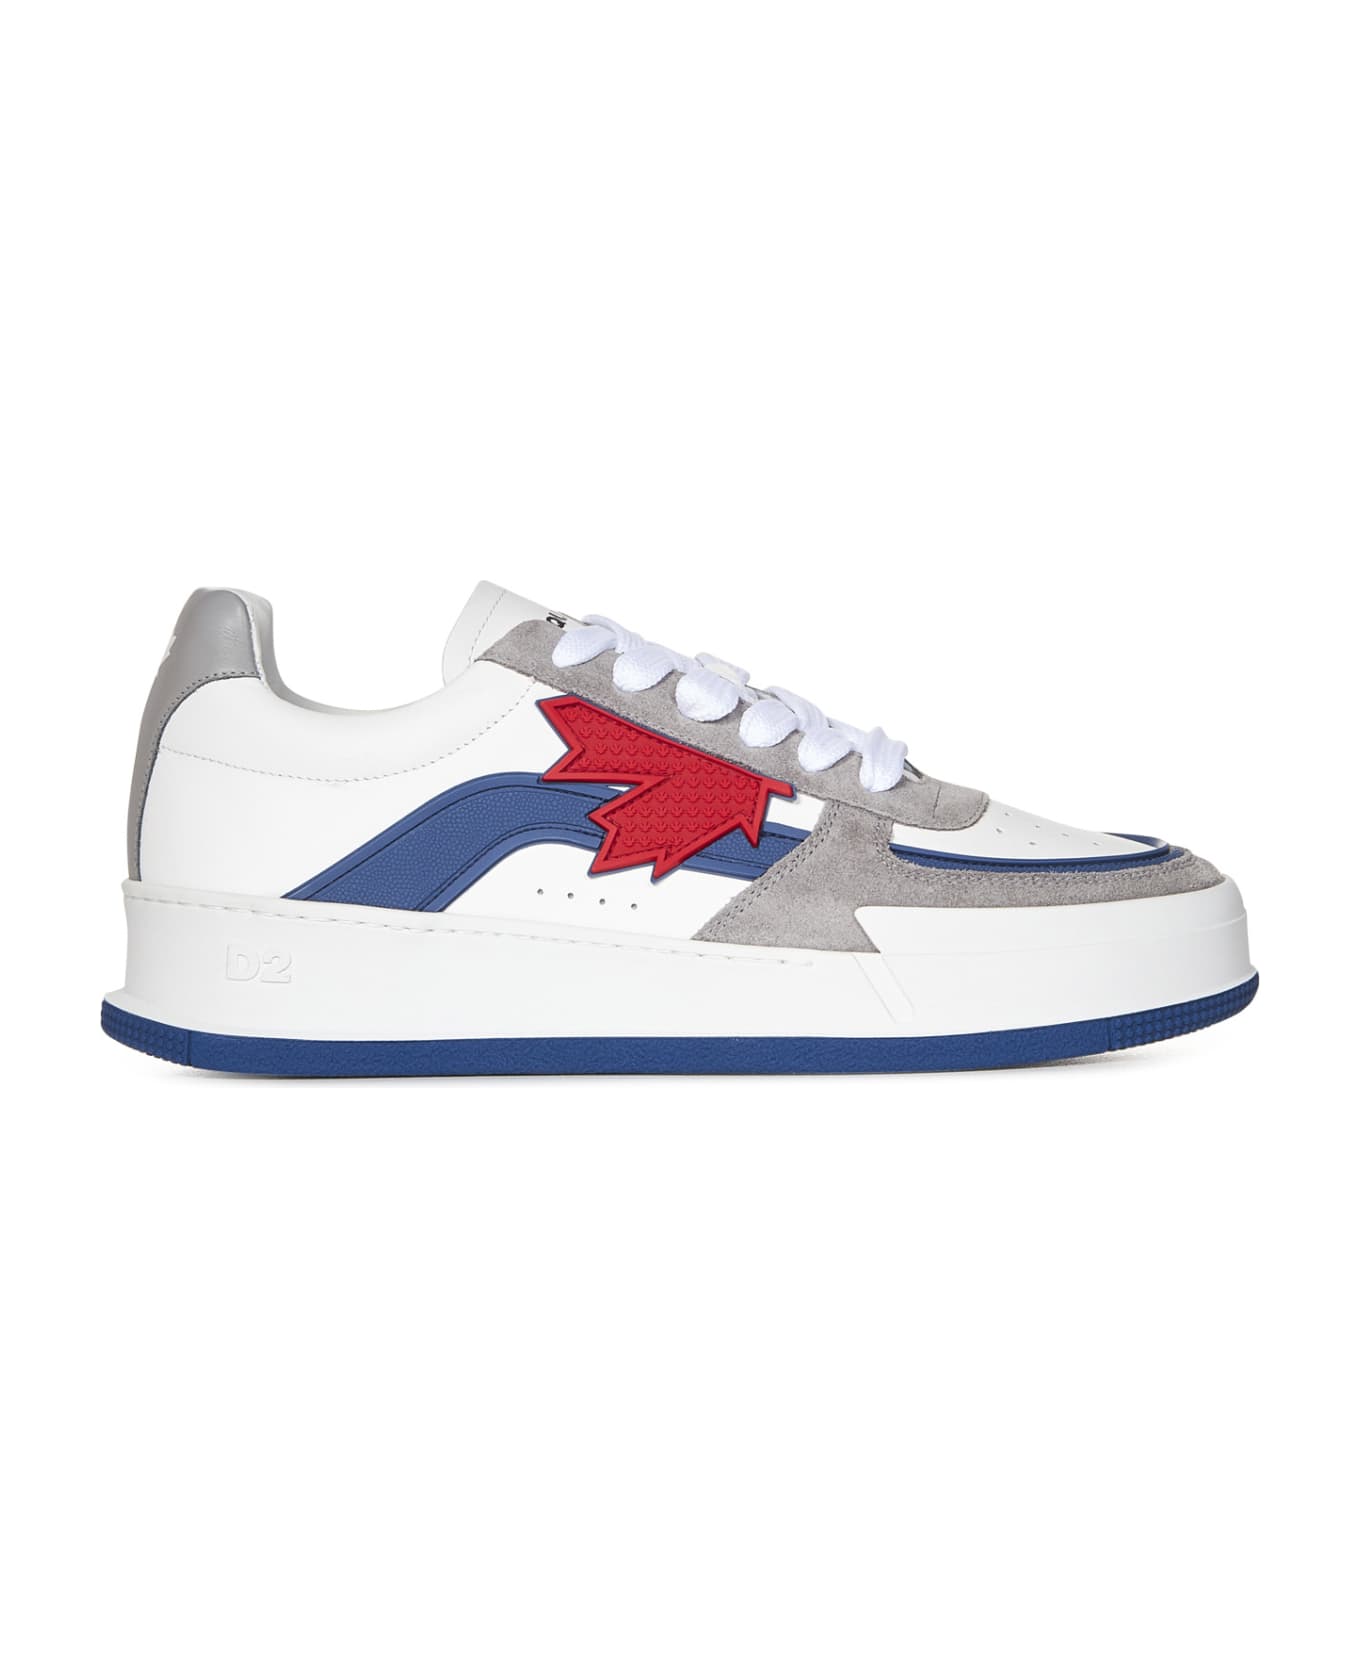 Dsquared2 Canadian Sneakers - White スニーカー